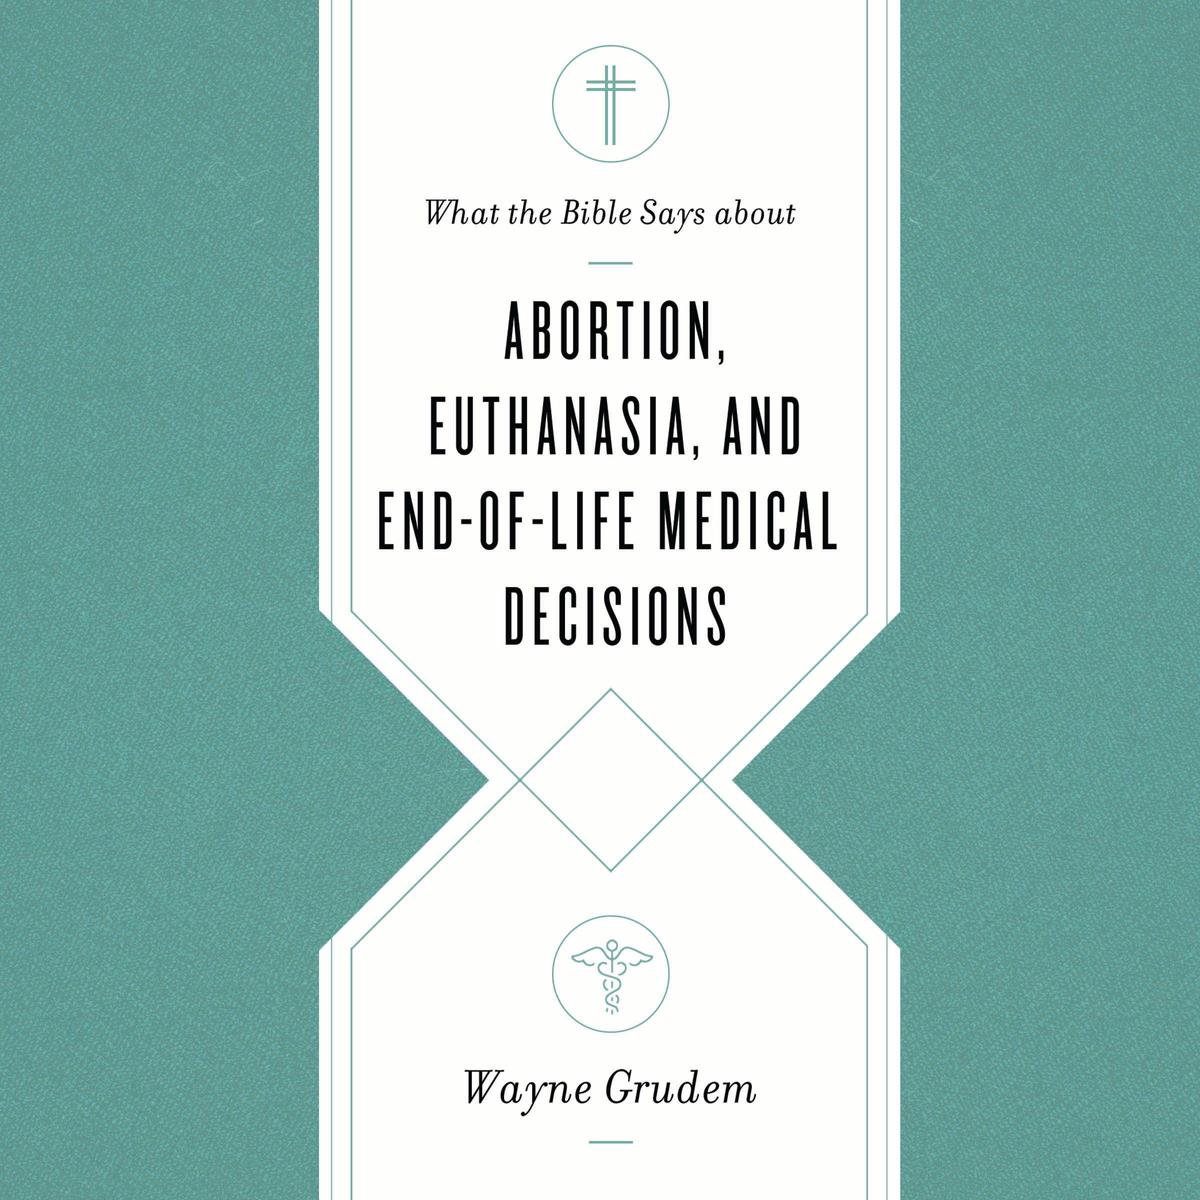 What the Bible Says about Abortion, Euthanasia, and End-of-Life Medical Decisions - Wayne Grudem